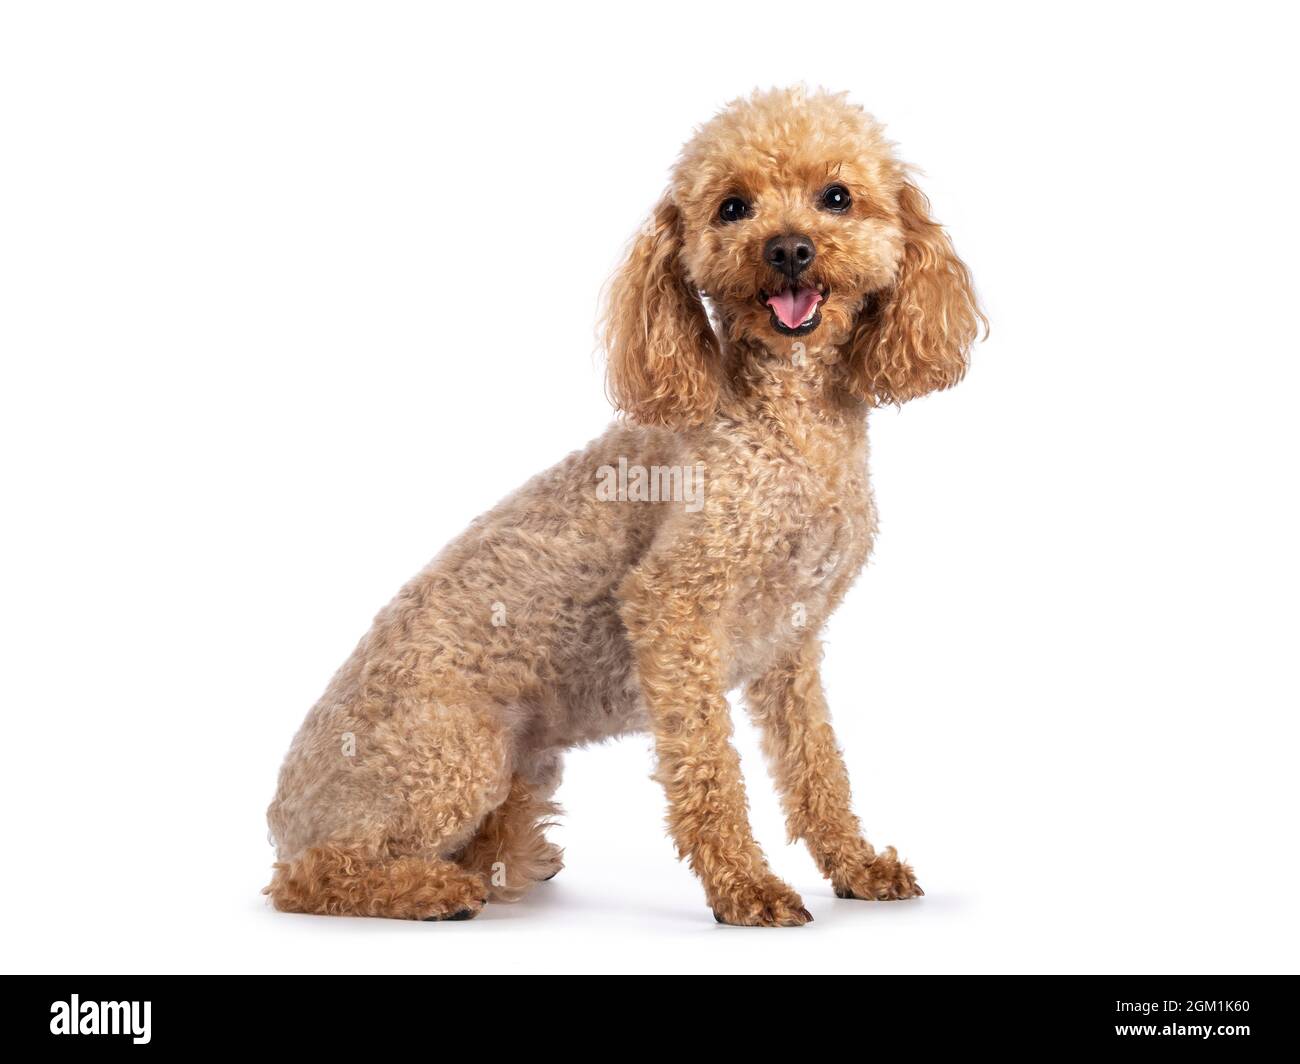 Adorable young adult apricot brown toy or miniature poodle. Recently groomed. Sitting side ways facing camera with mouth open showing tongue. Isolated Stock Photo